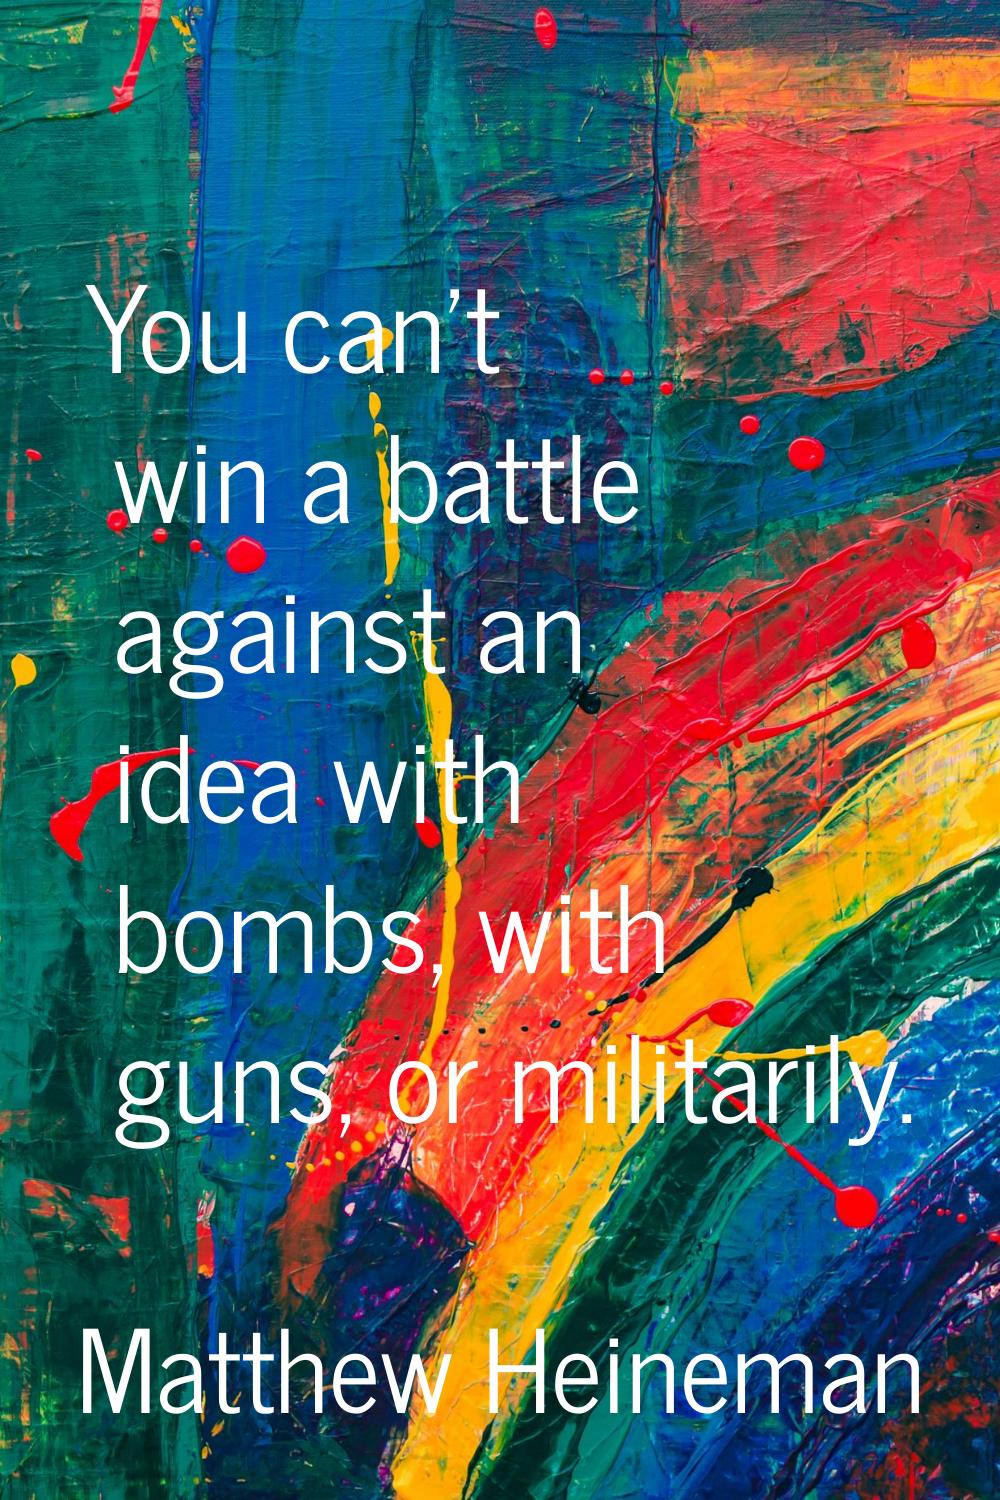 You can't win a battle against an idea with bombs, with guns, or militarily.